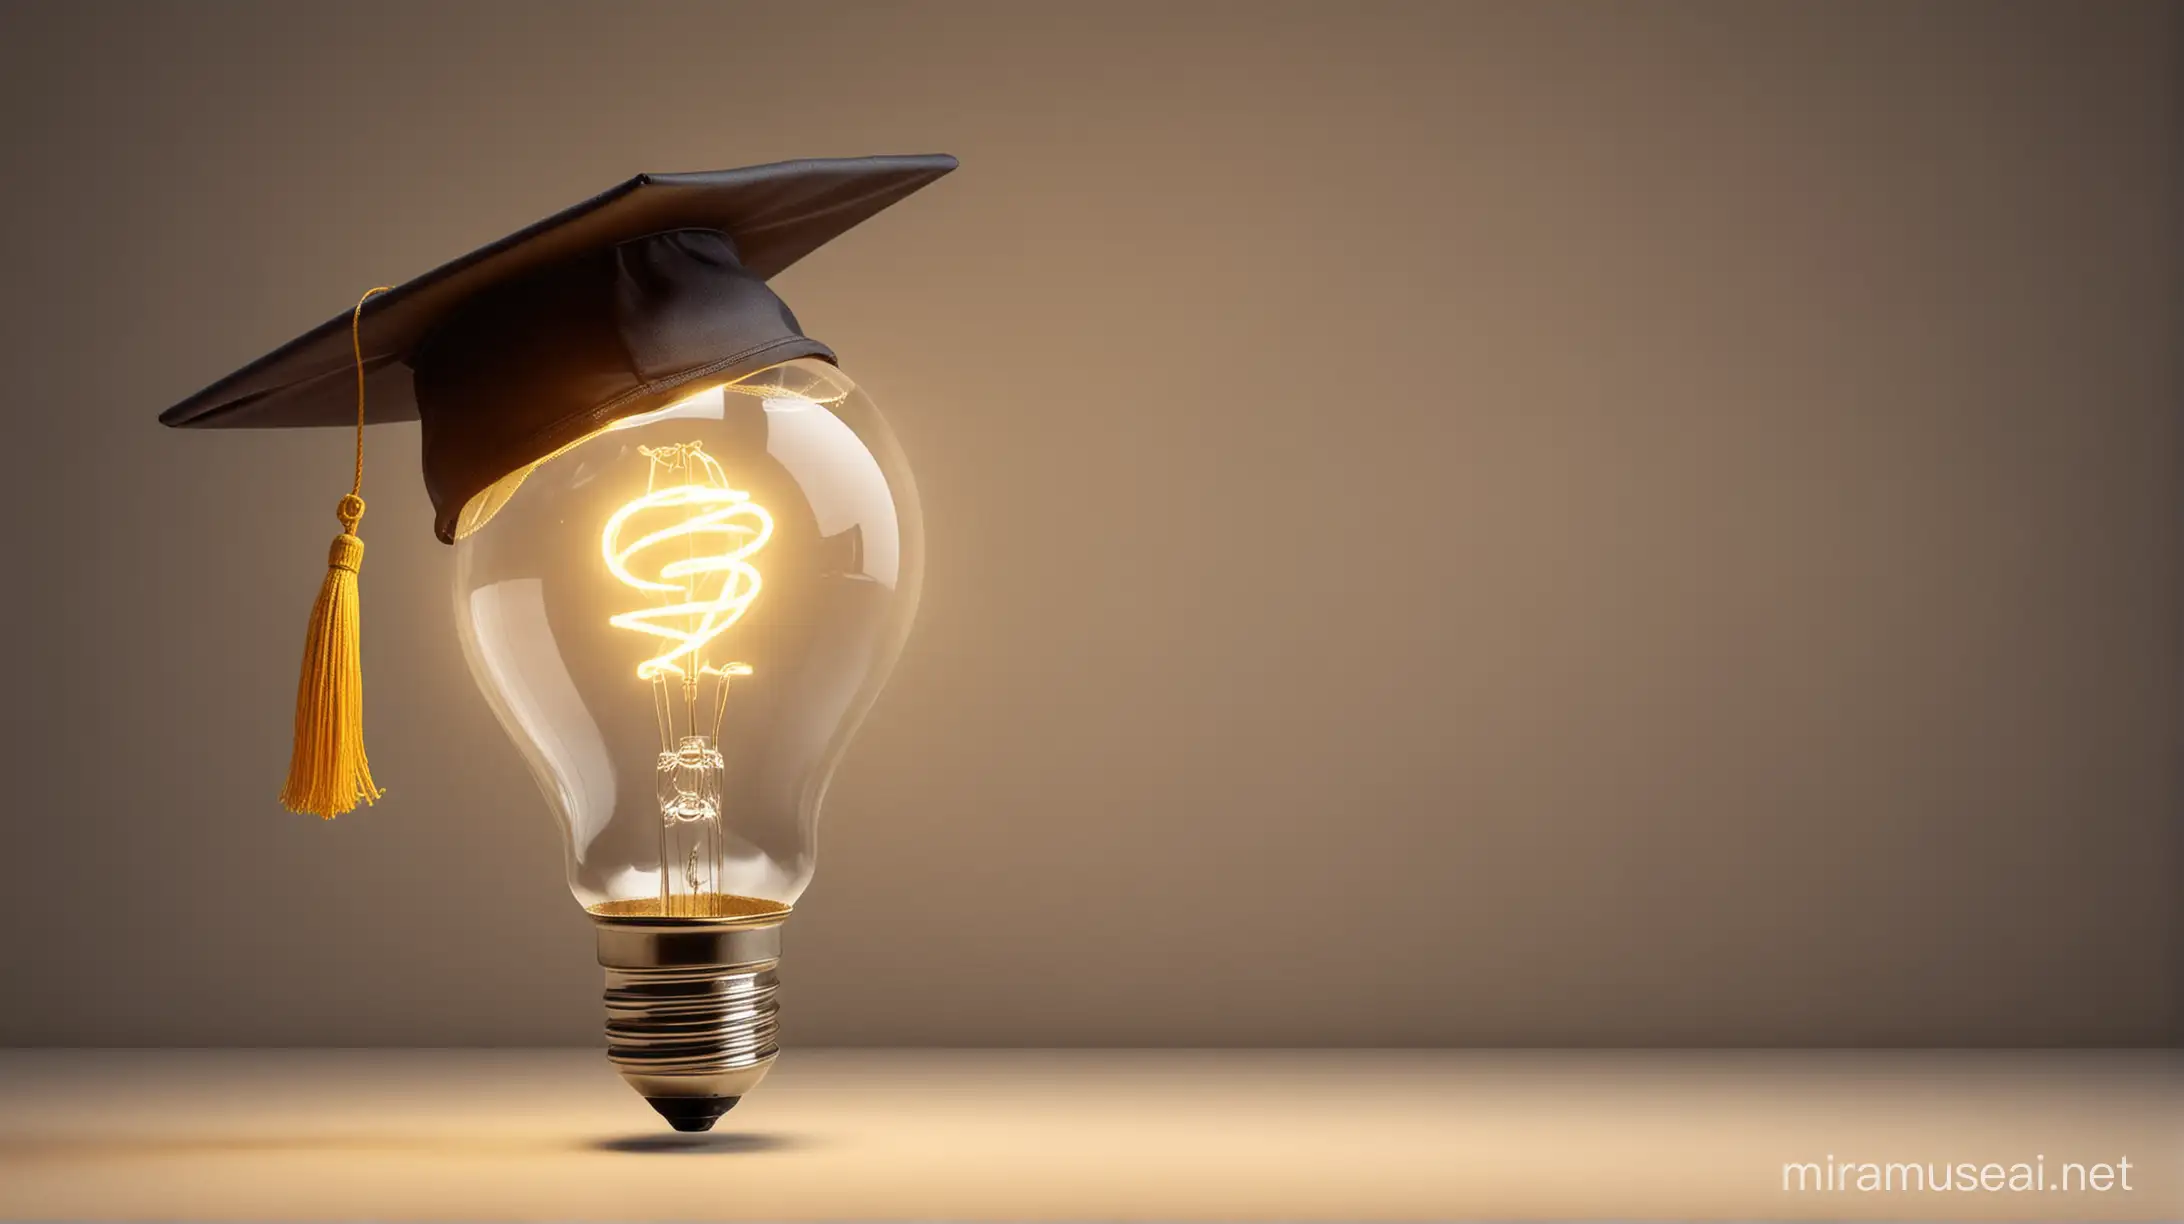 glowing flowing education light bulb, with graduation hat, the light bulb is one tenth the size of the image and located on the right of the image. 